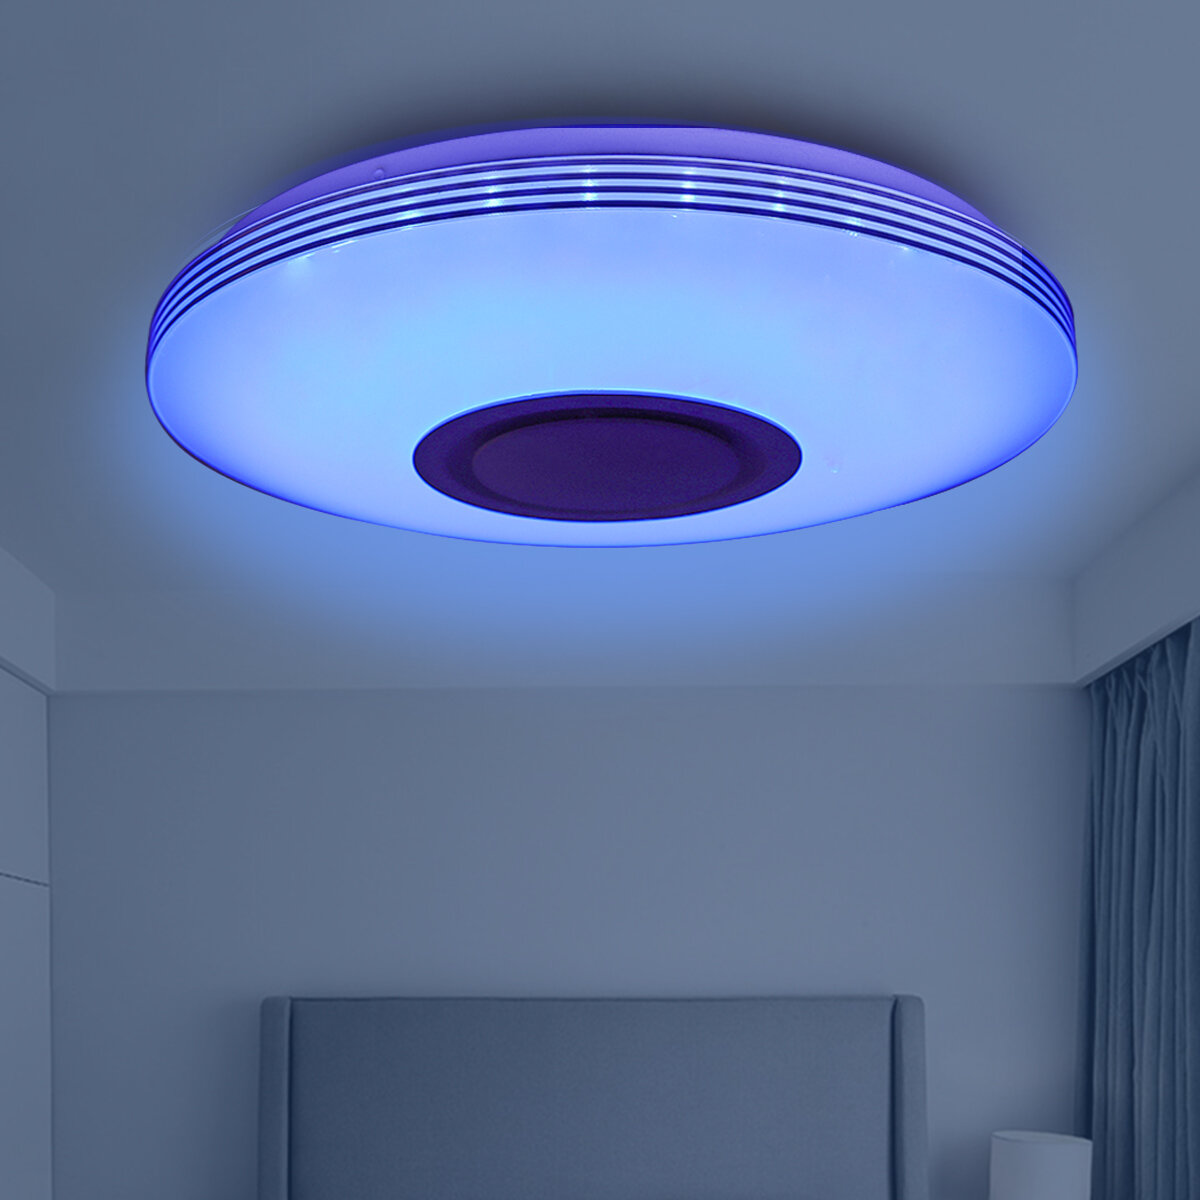 39CM RGB bluetooth WIFI LED Ceiling Light Dimmable Music Speaker Lamp With Remote Control for Indoor Home 85-265V